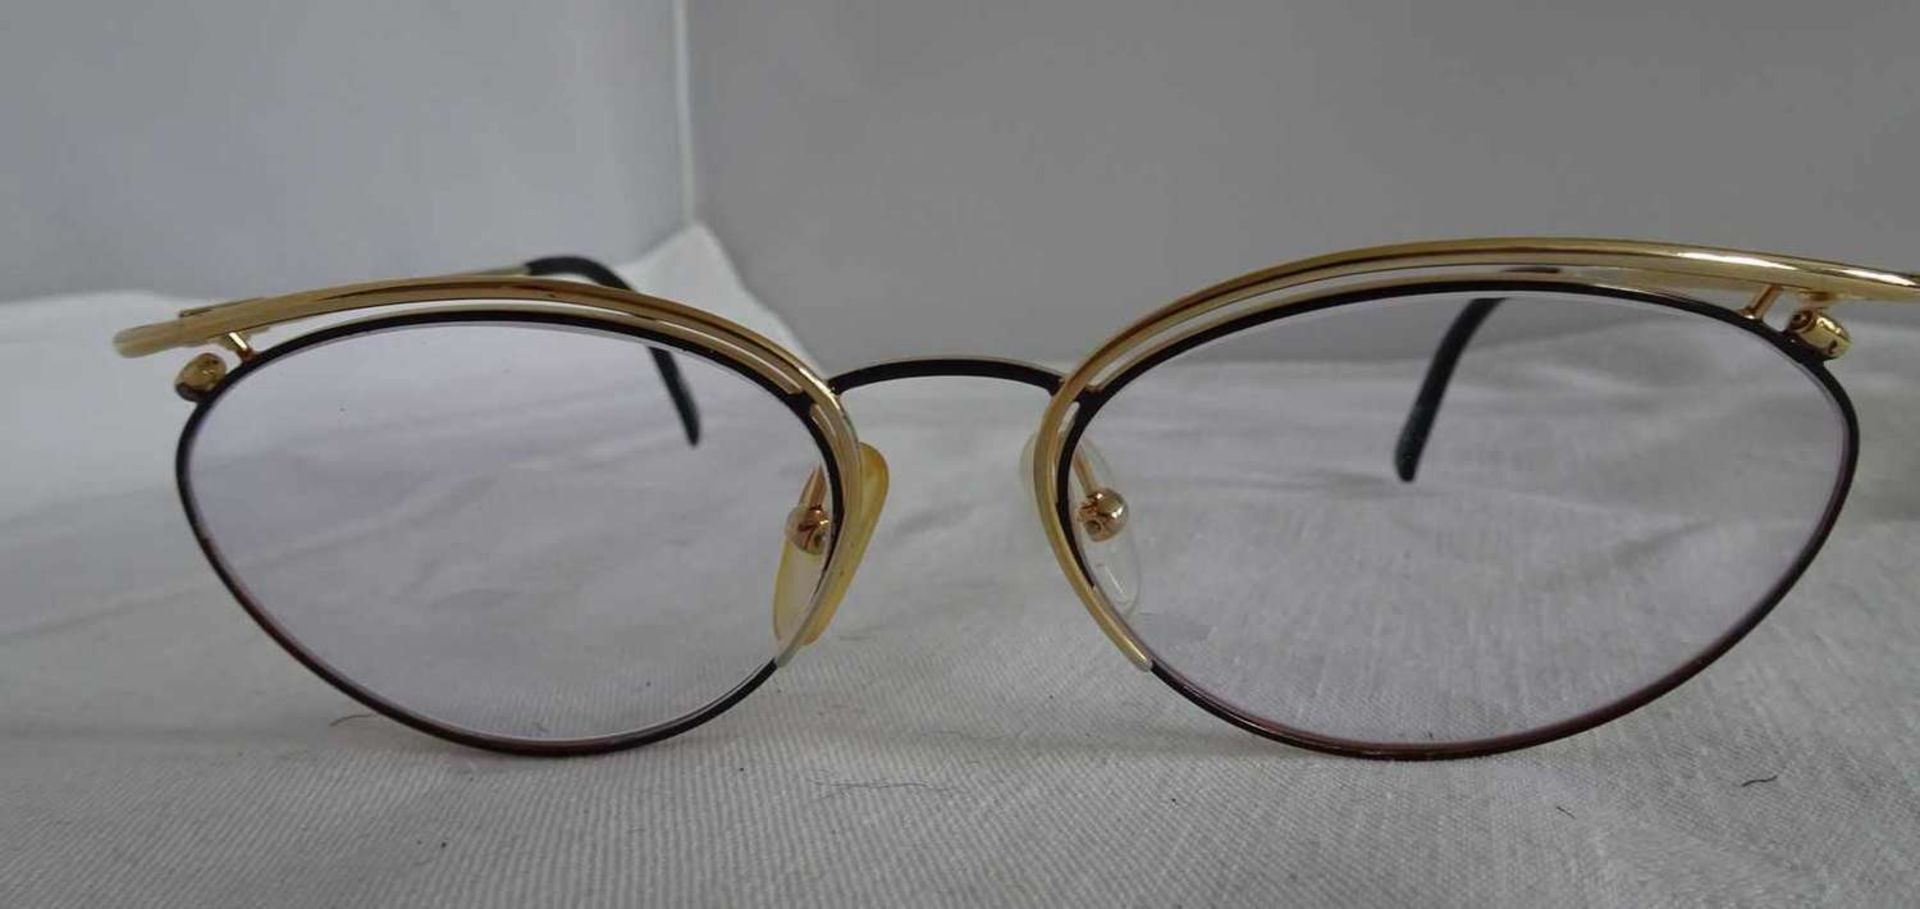 Brillengestell Paloma Picasso, guter Zustand.Glasses frame Paloma Picasso, good condition.